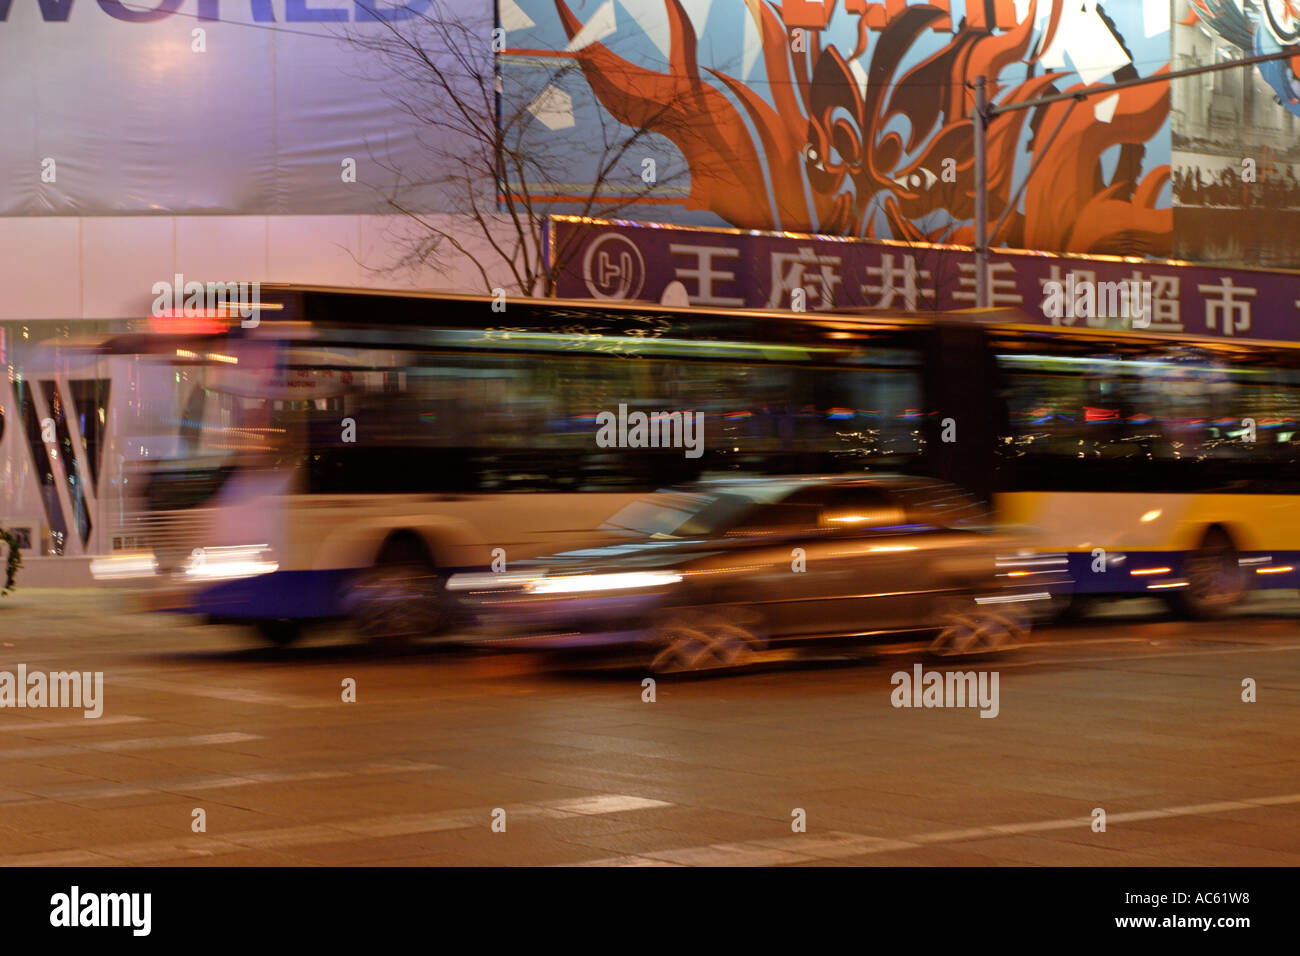 Buses and cars in Beijing, China at night Stock Photo